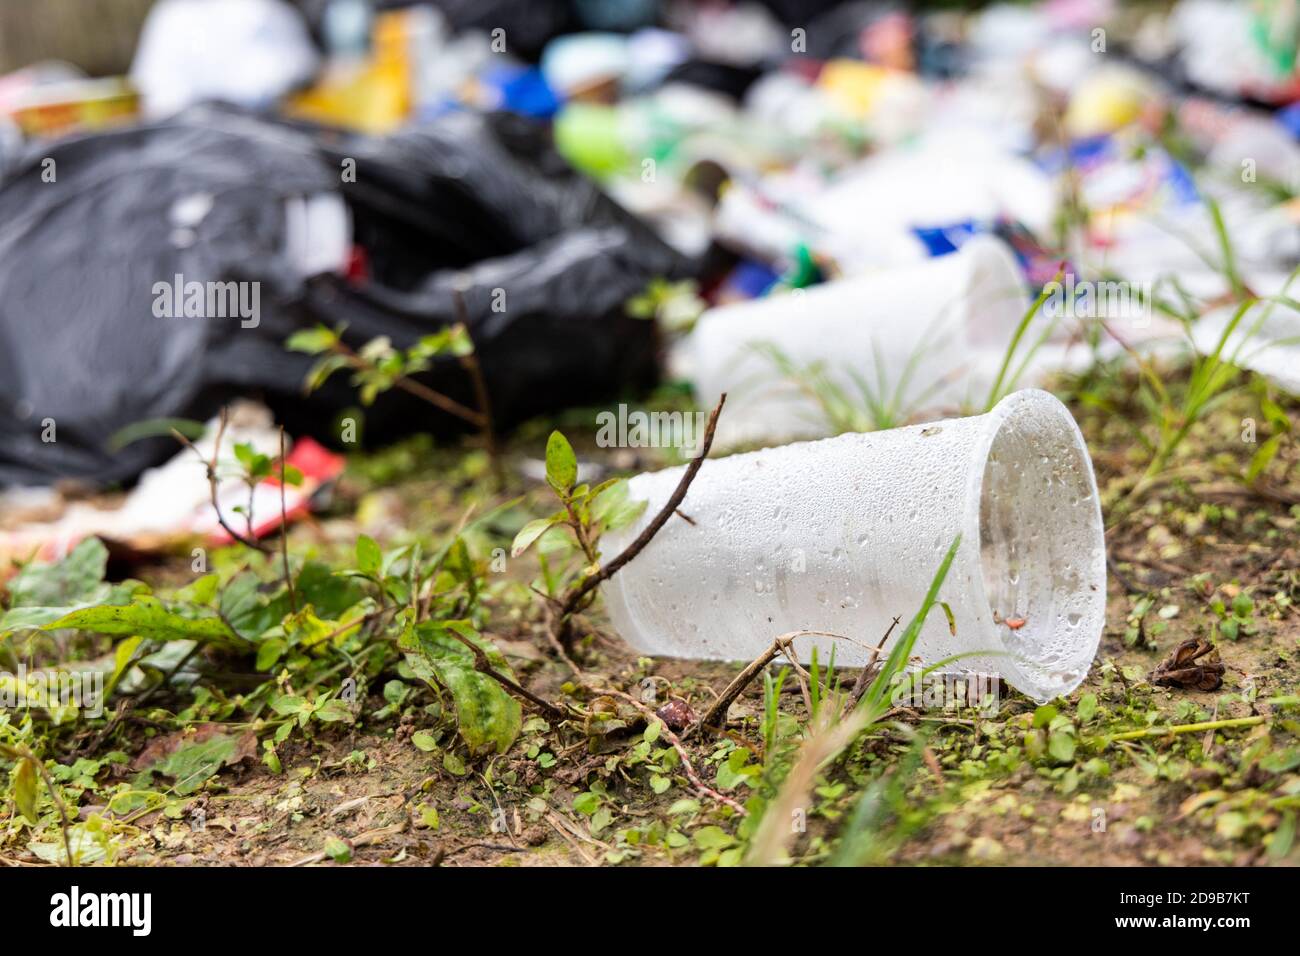 Indiscriminate litter of plastic non-biodegradable at garbage dump Stock Photo